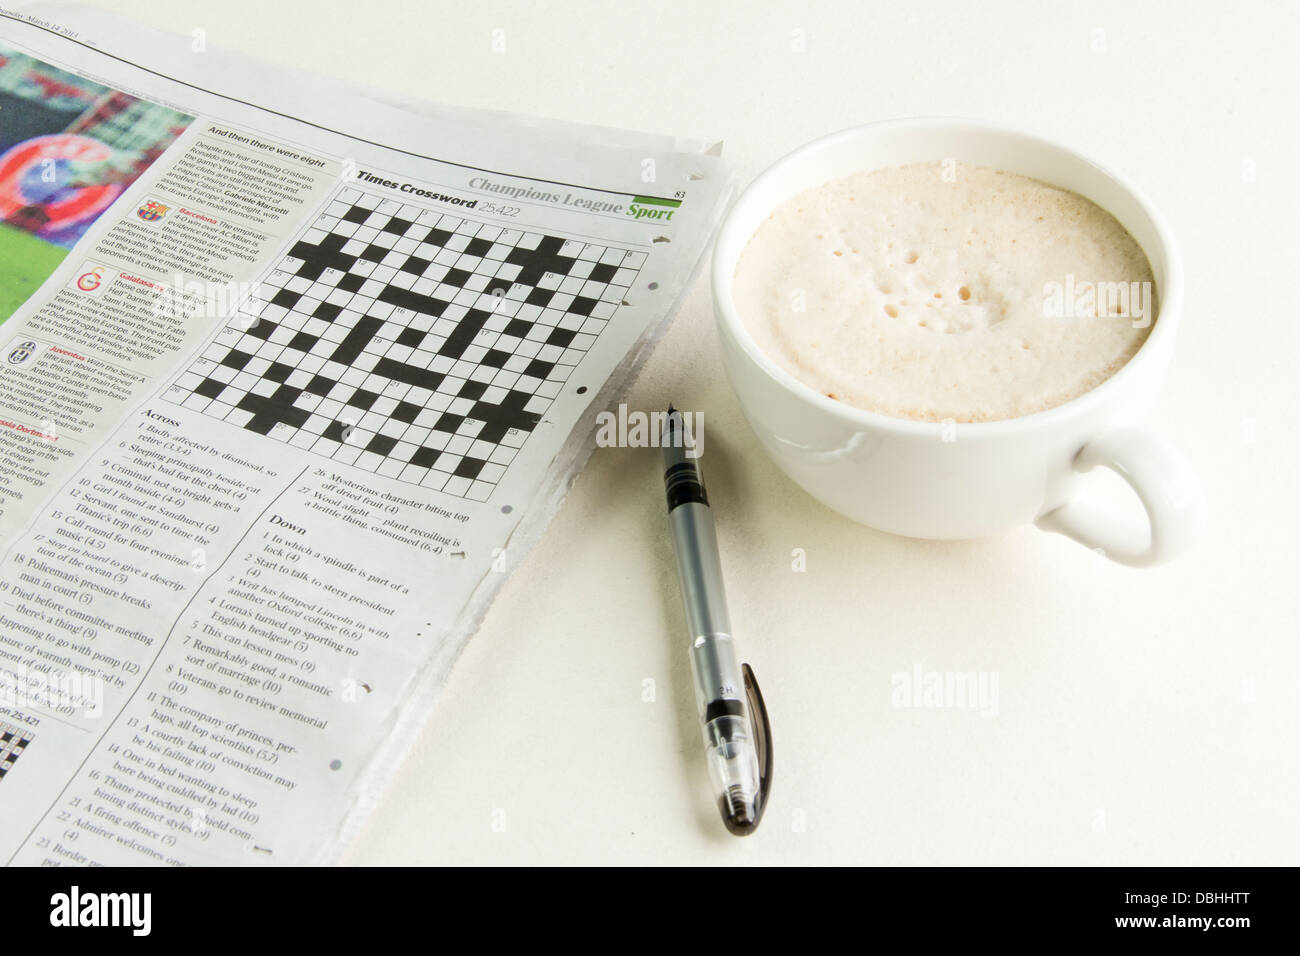 The Times newspaper open at the cryptic crossword page with a pen and a cup of cappuccino coffee beside it. Stock Photo